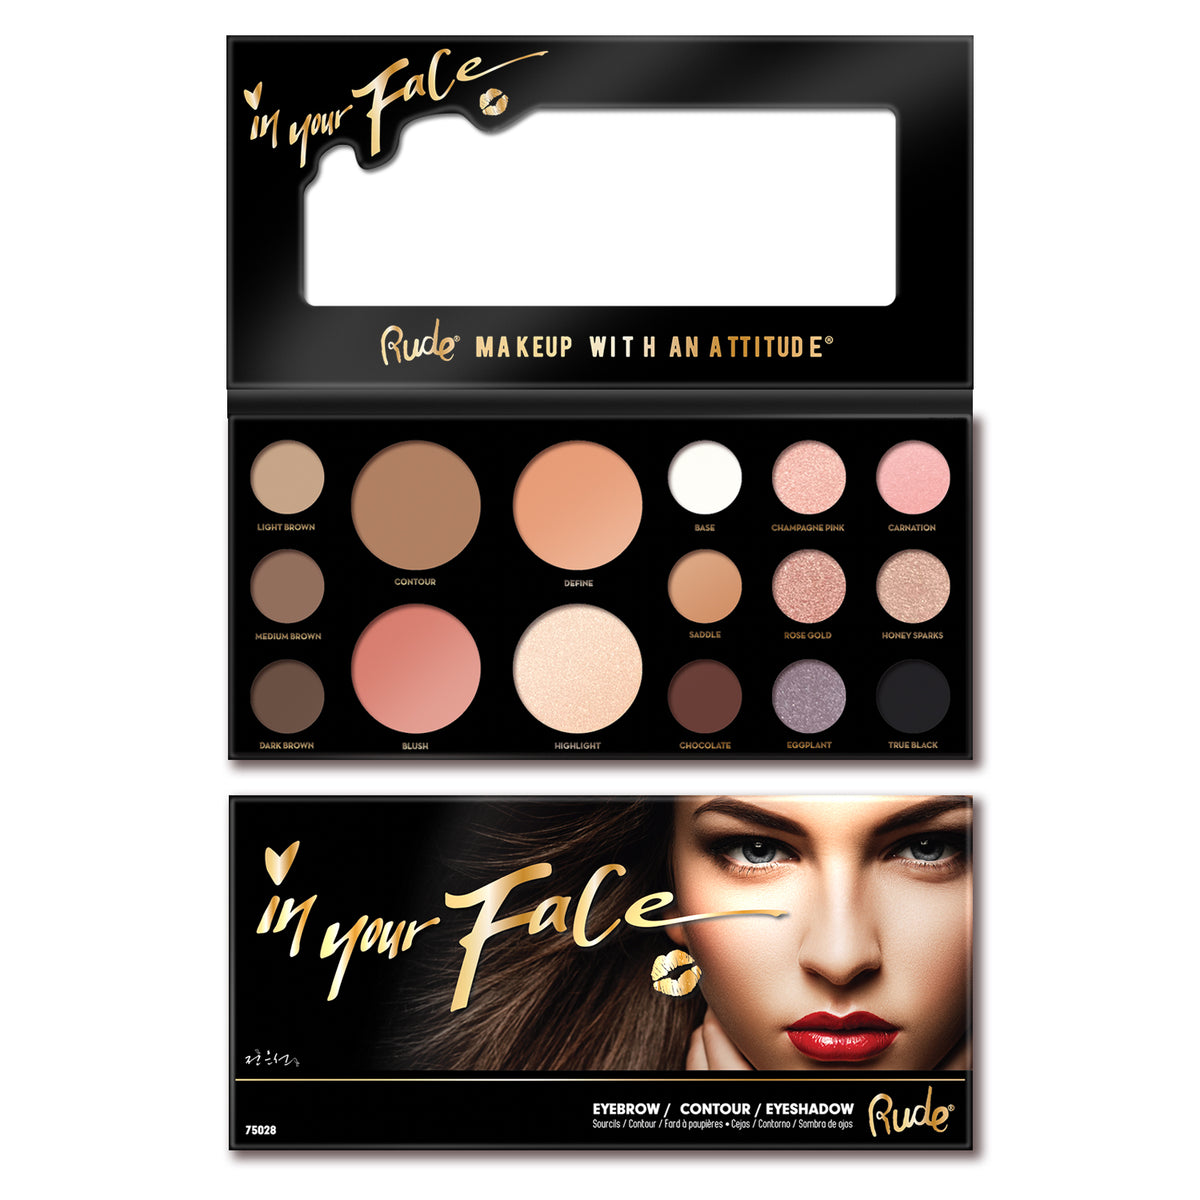 In Your Face 3-in-1 Palette